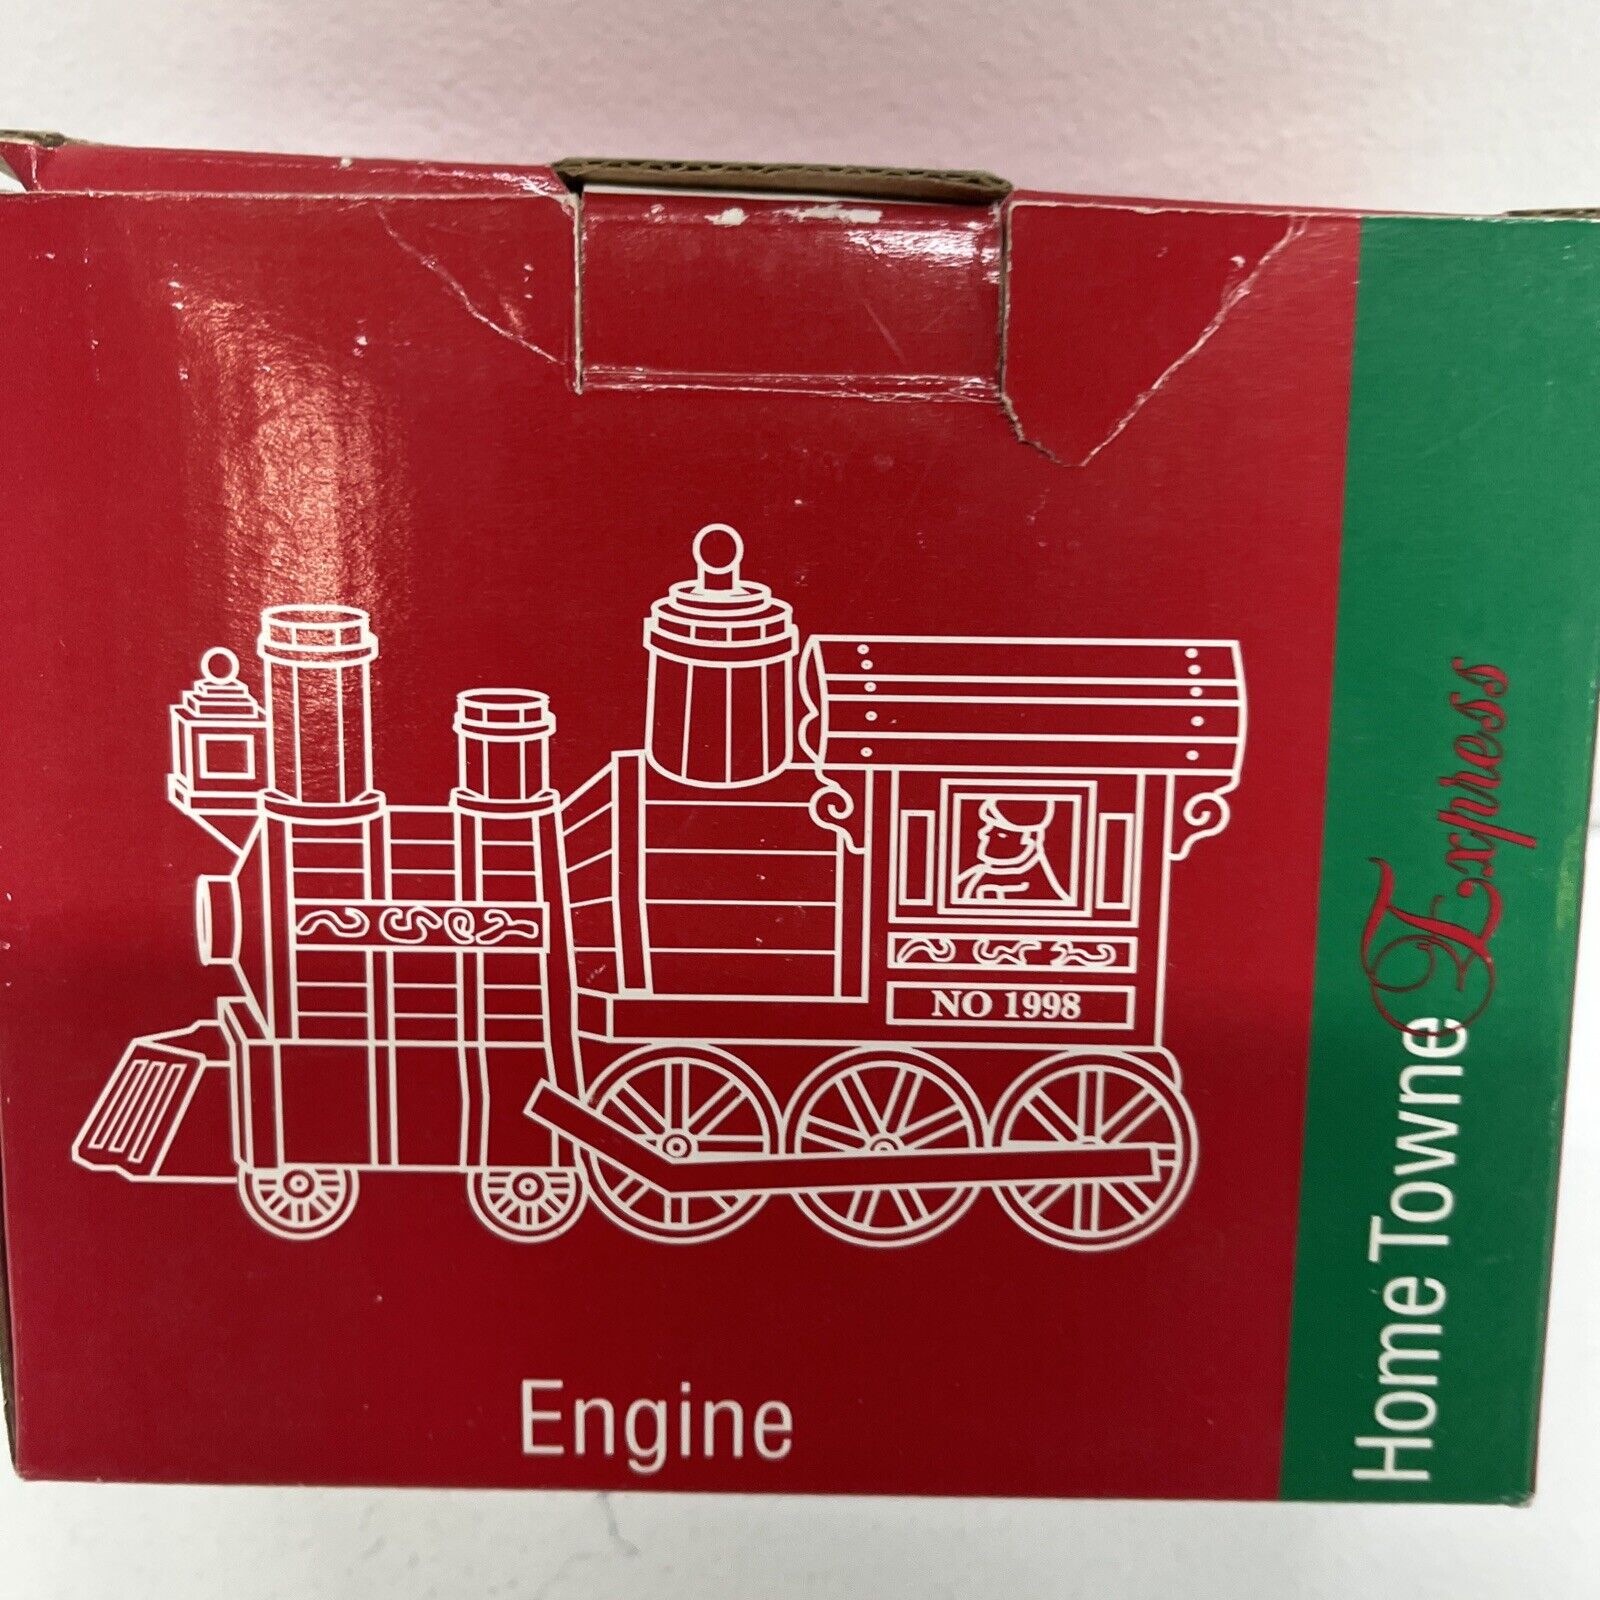 Home Towne Express - 1998 Edition Train Engine JC Penny Christmas Village